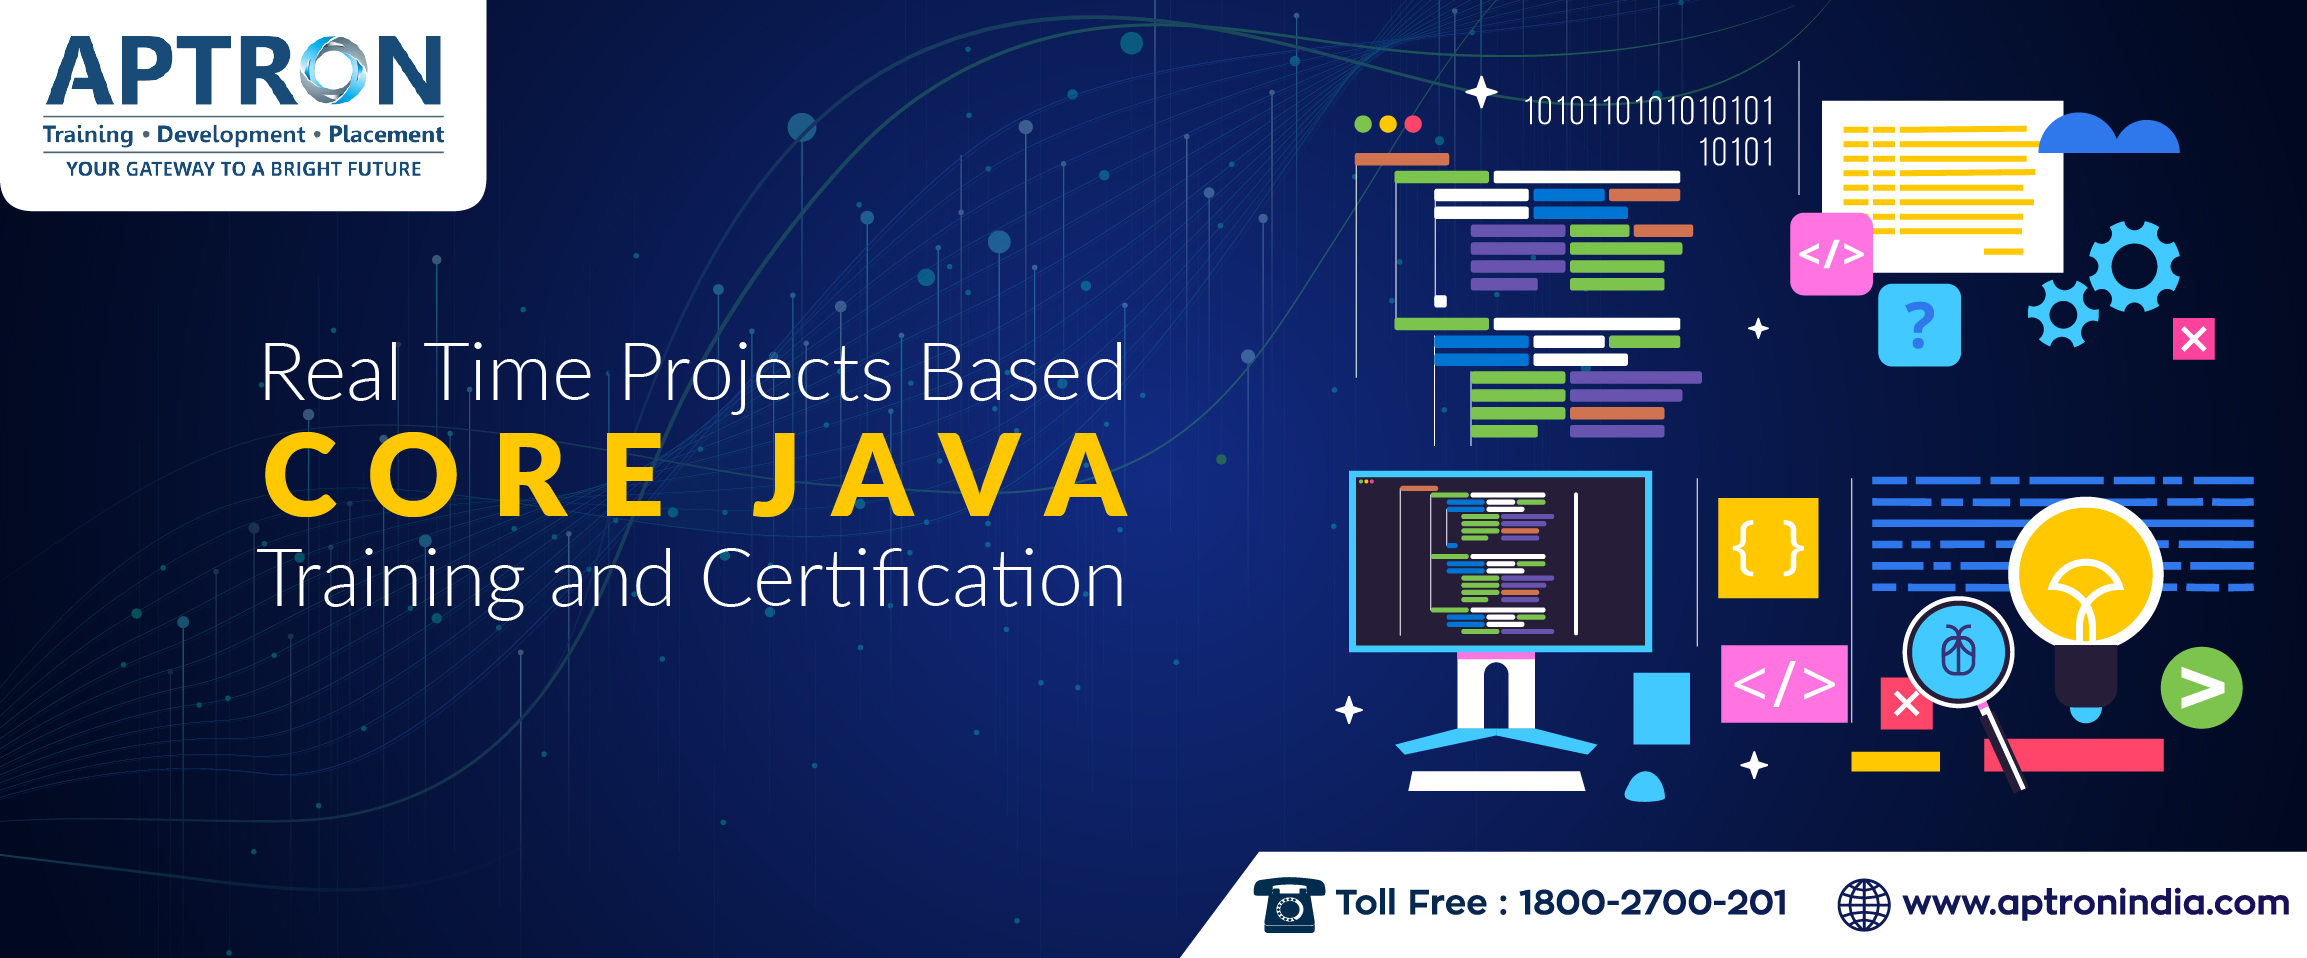 Core Java Training and Certification